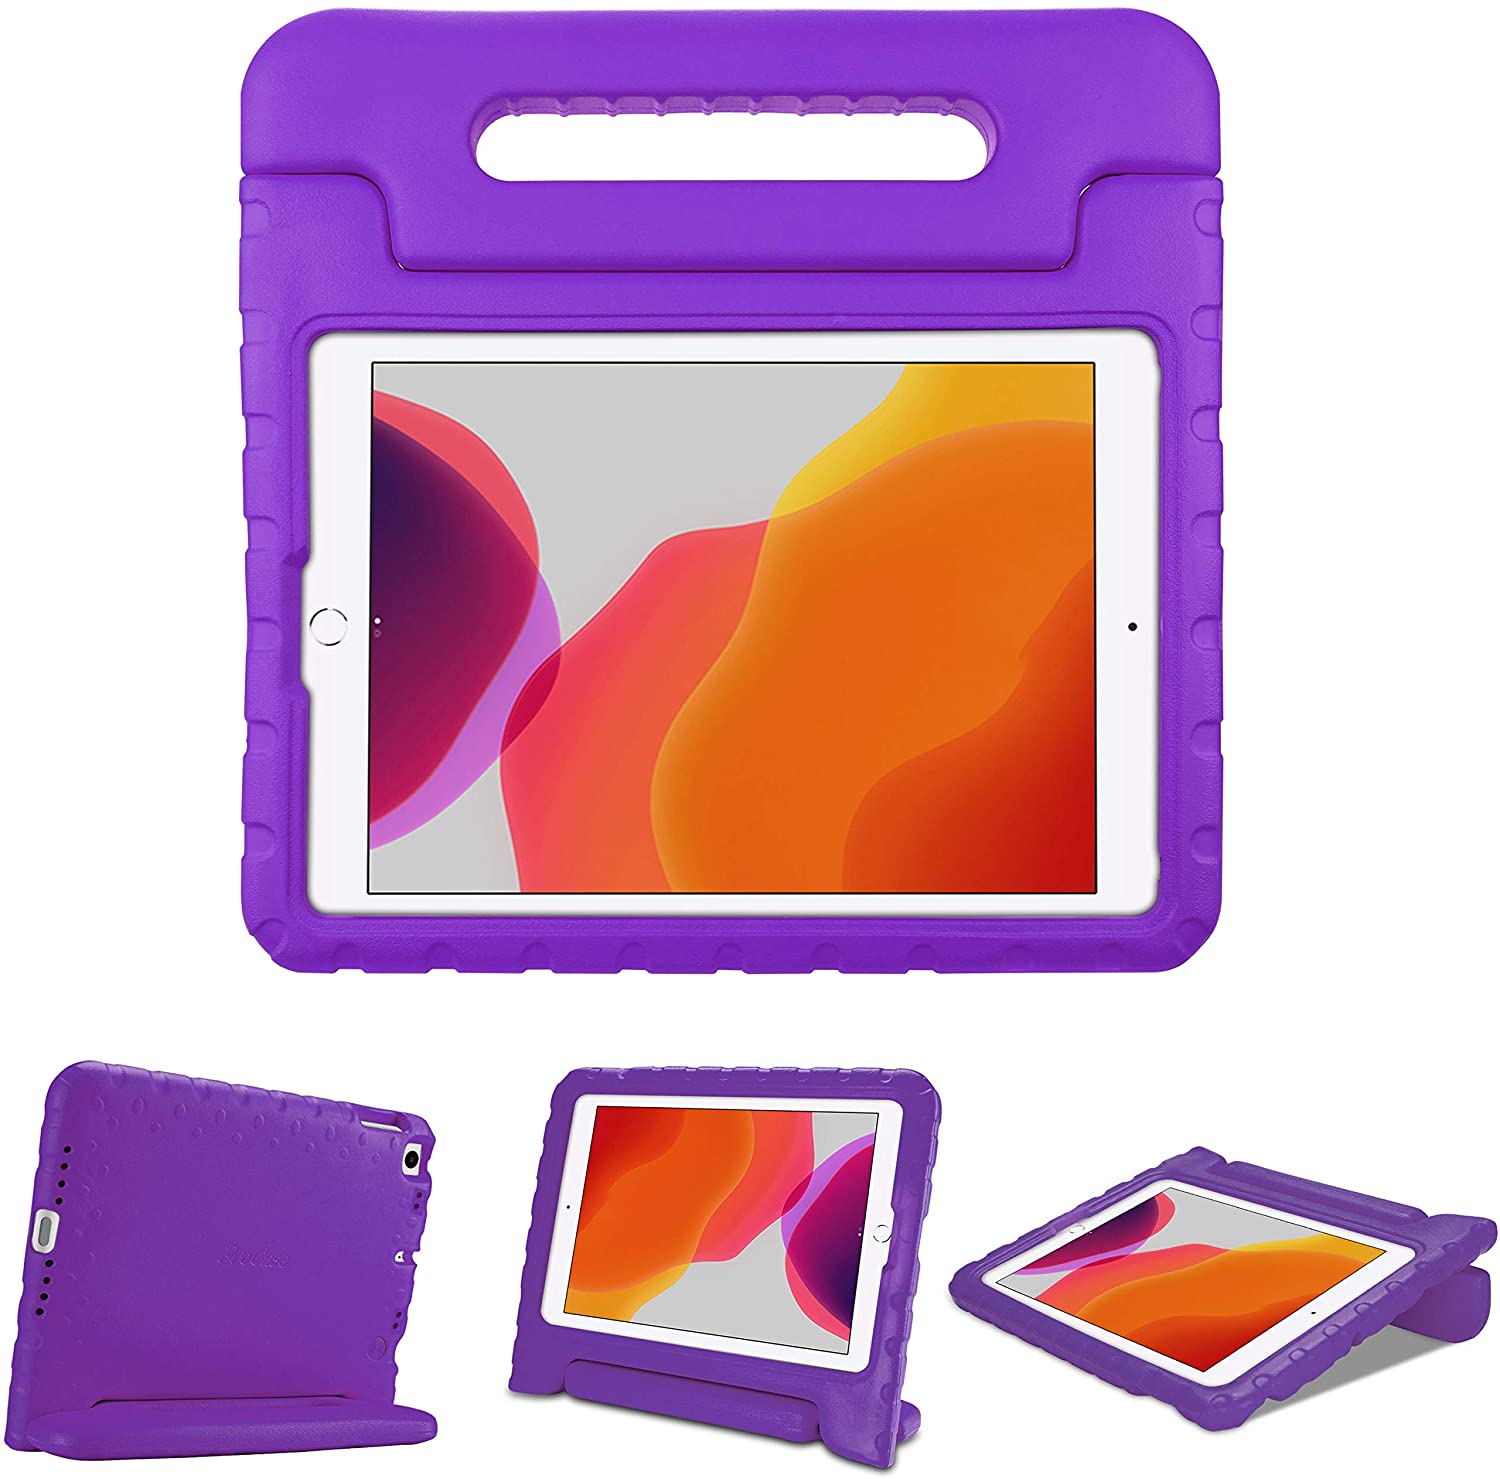 iPad 10.2 7th/8th 2019 2020/Pro 10.5/Air 3rd Generation case for Kids | ProCase purple